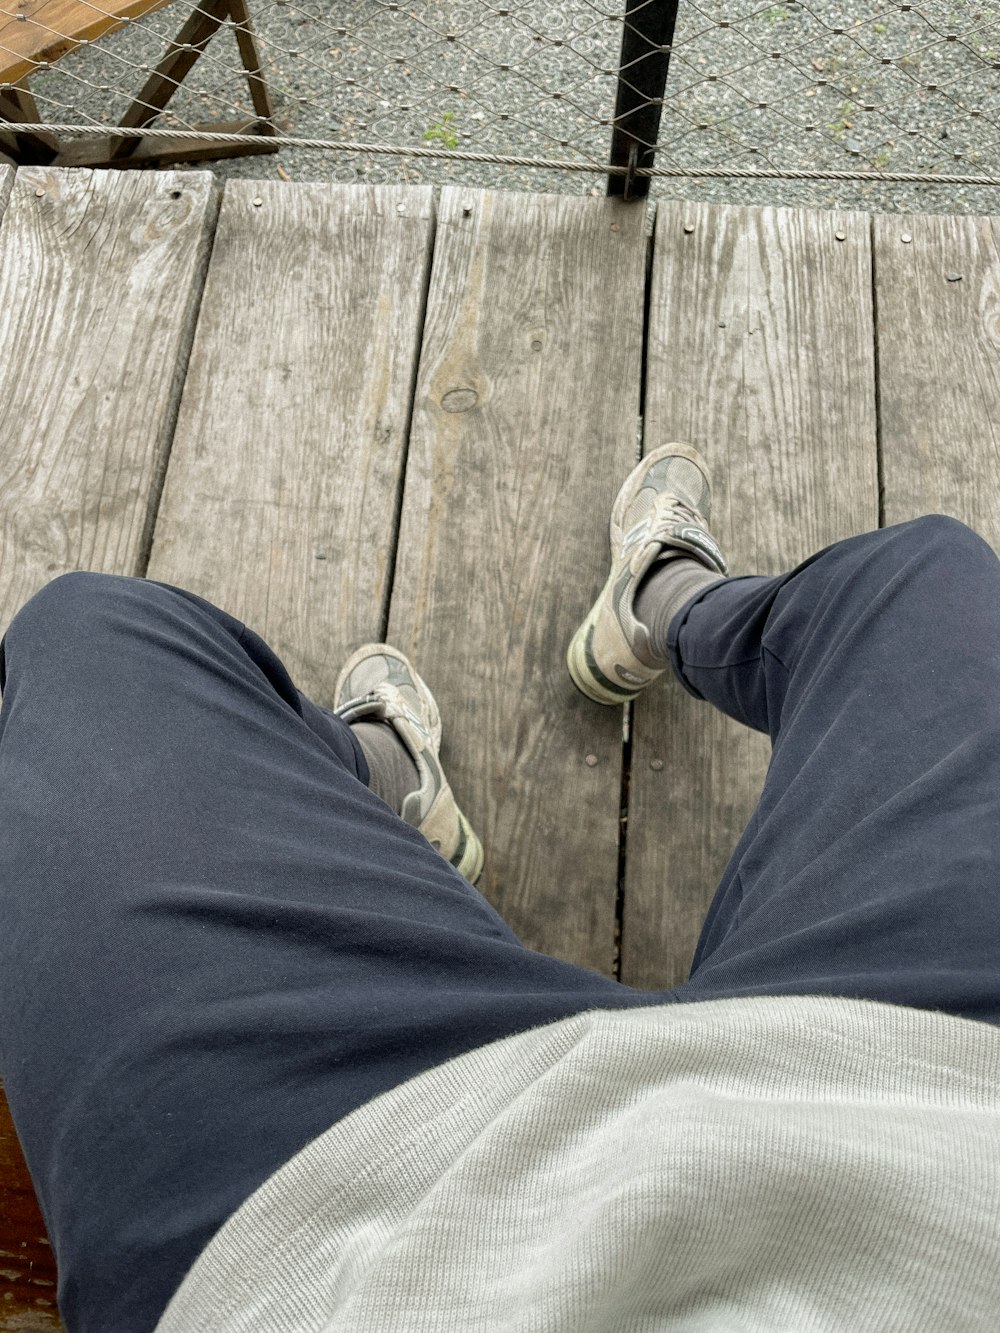 a person standing on a wooden platform with their feet up